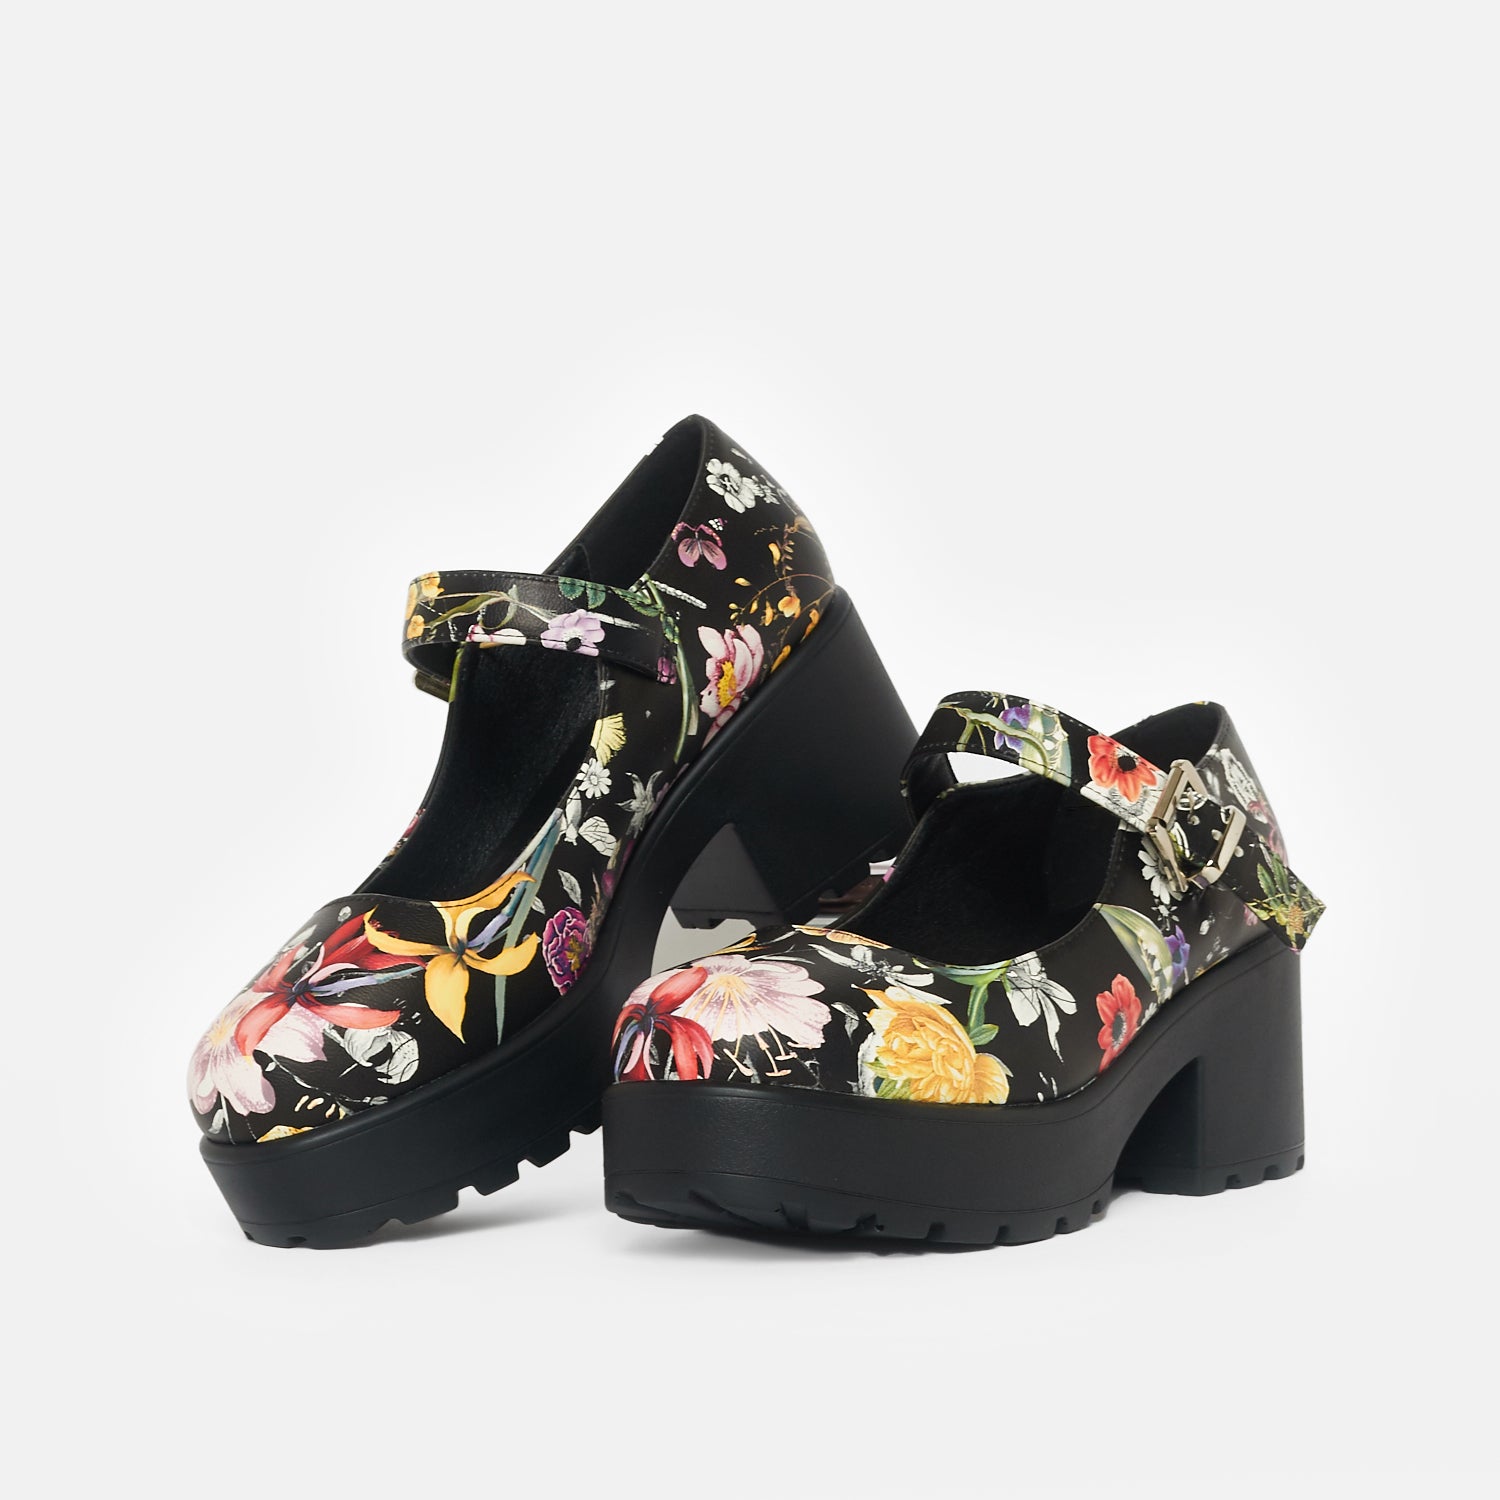 Tira Mary Jane Shoes 'Floral Edition' - Mary Janes - KOI Footwear - Black - Three-Quarter View